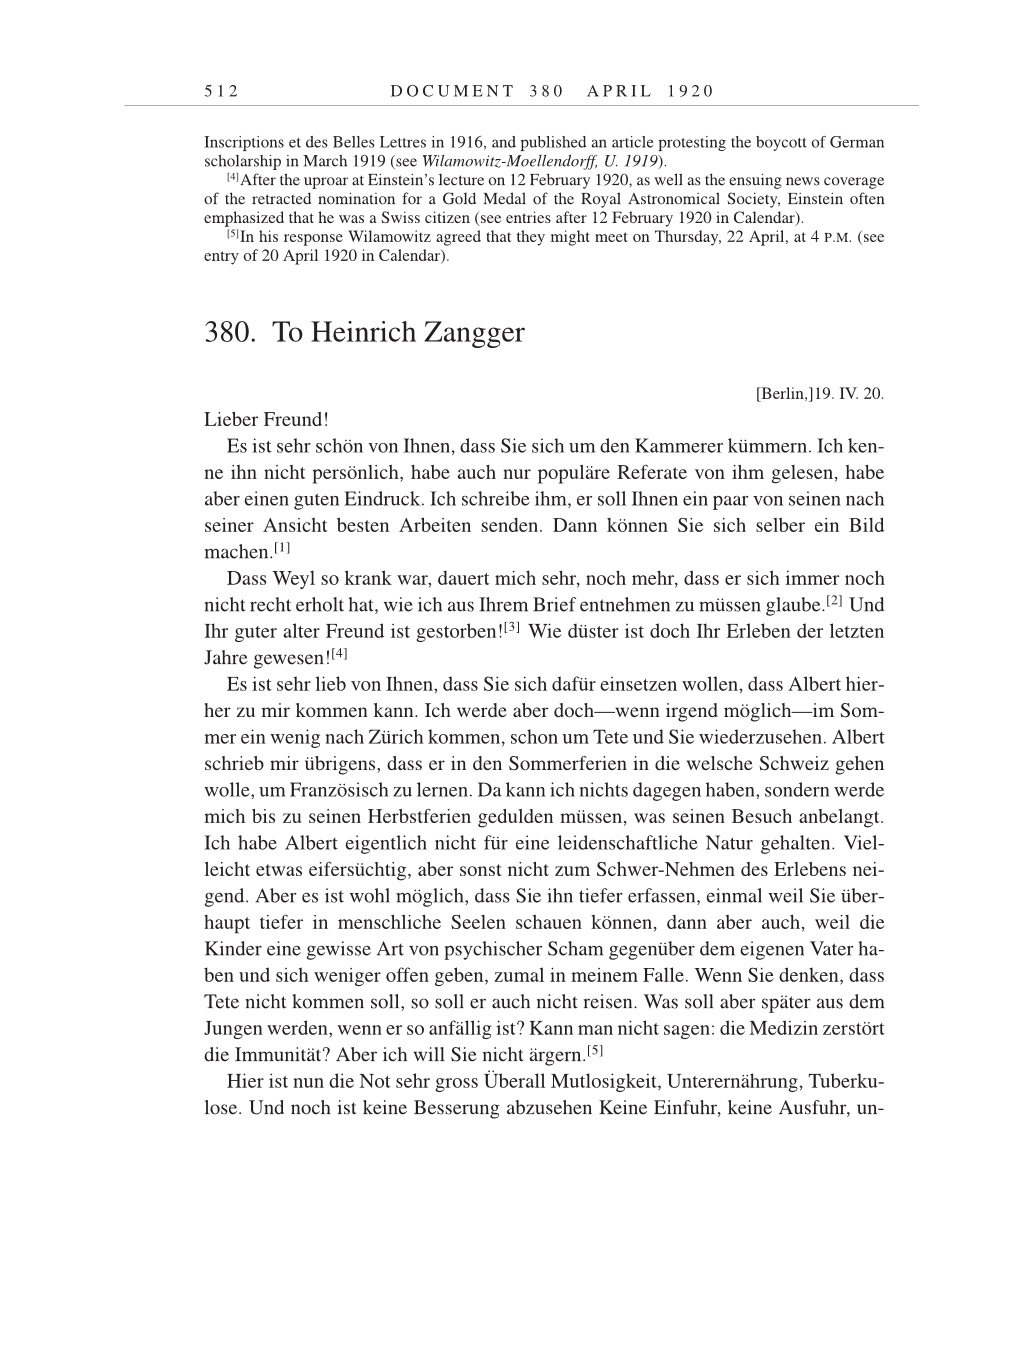 Volume 9: The Berlin Years: Correspondence January 1919-April 1920 page 512